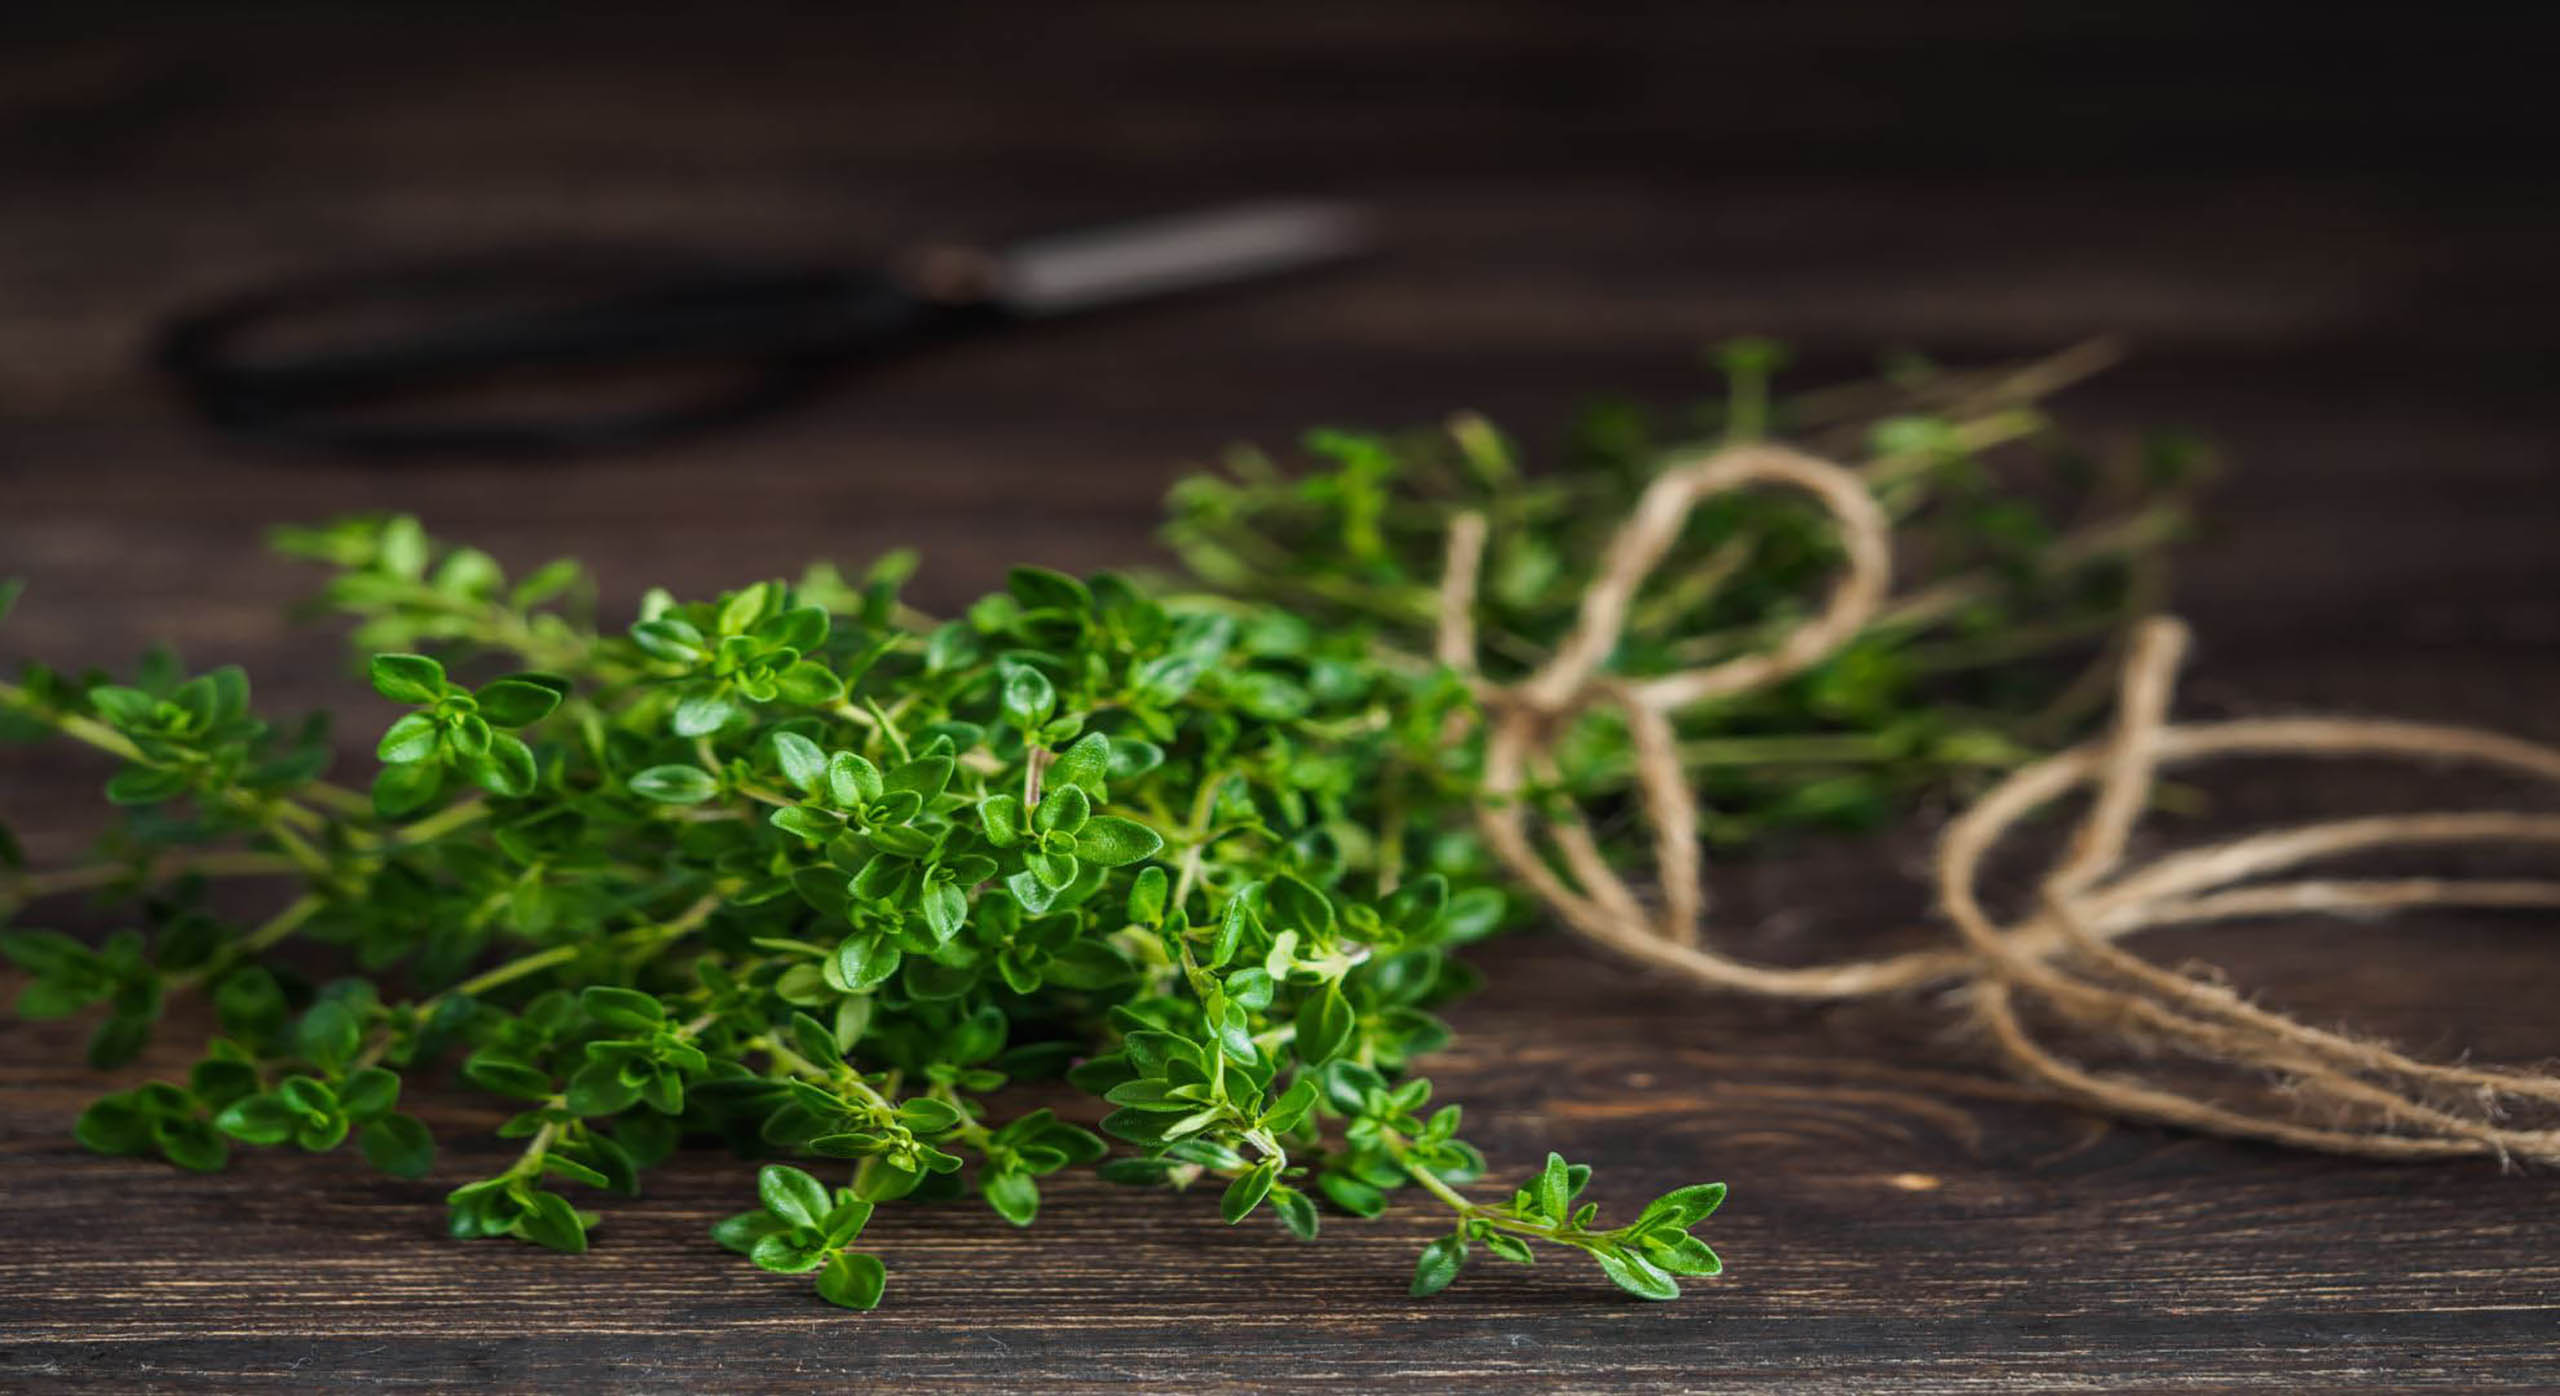 Thyme tied together with a string.